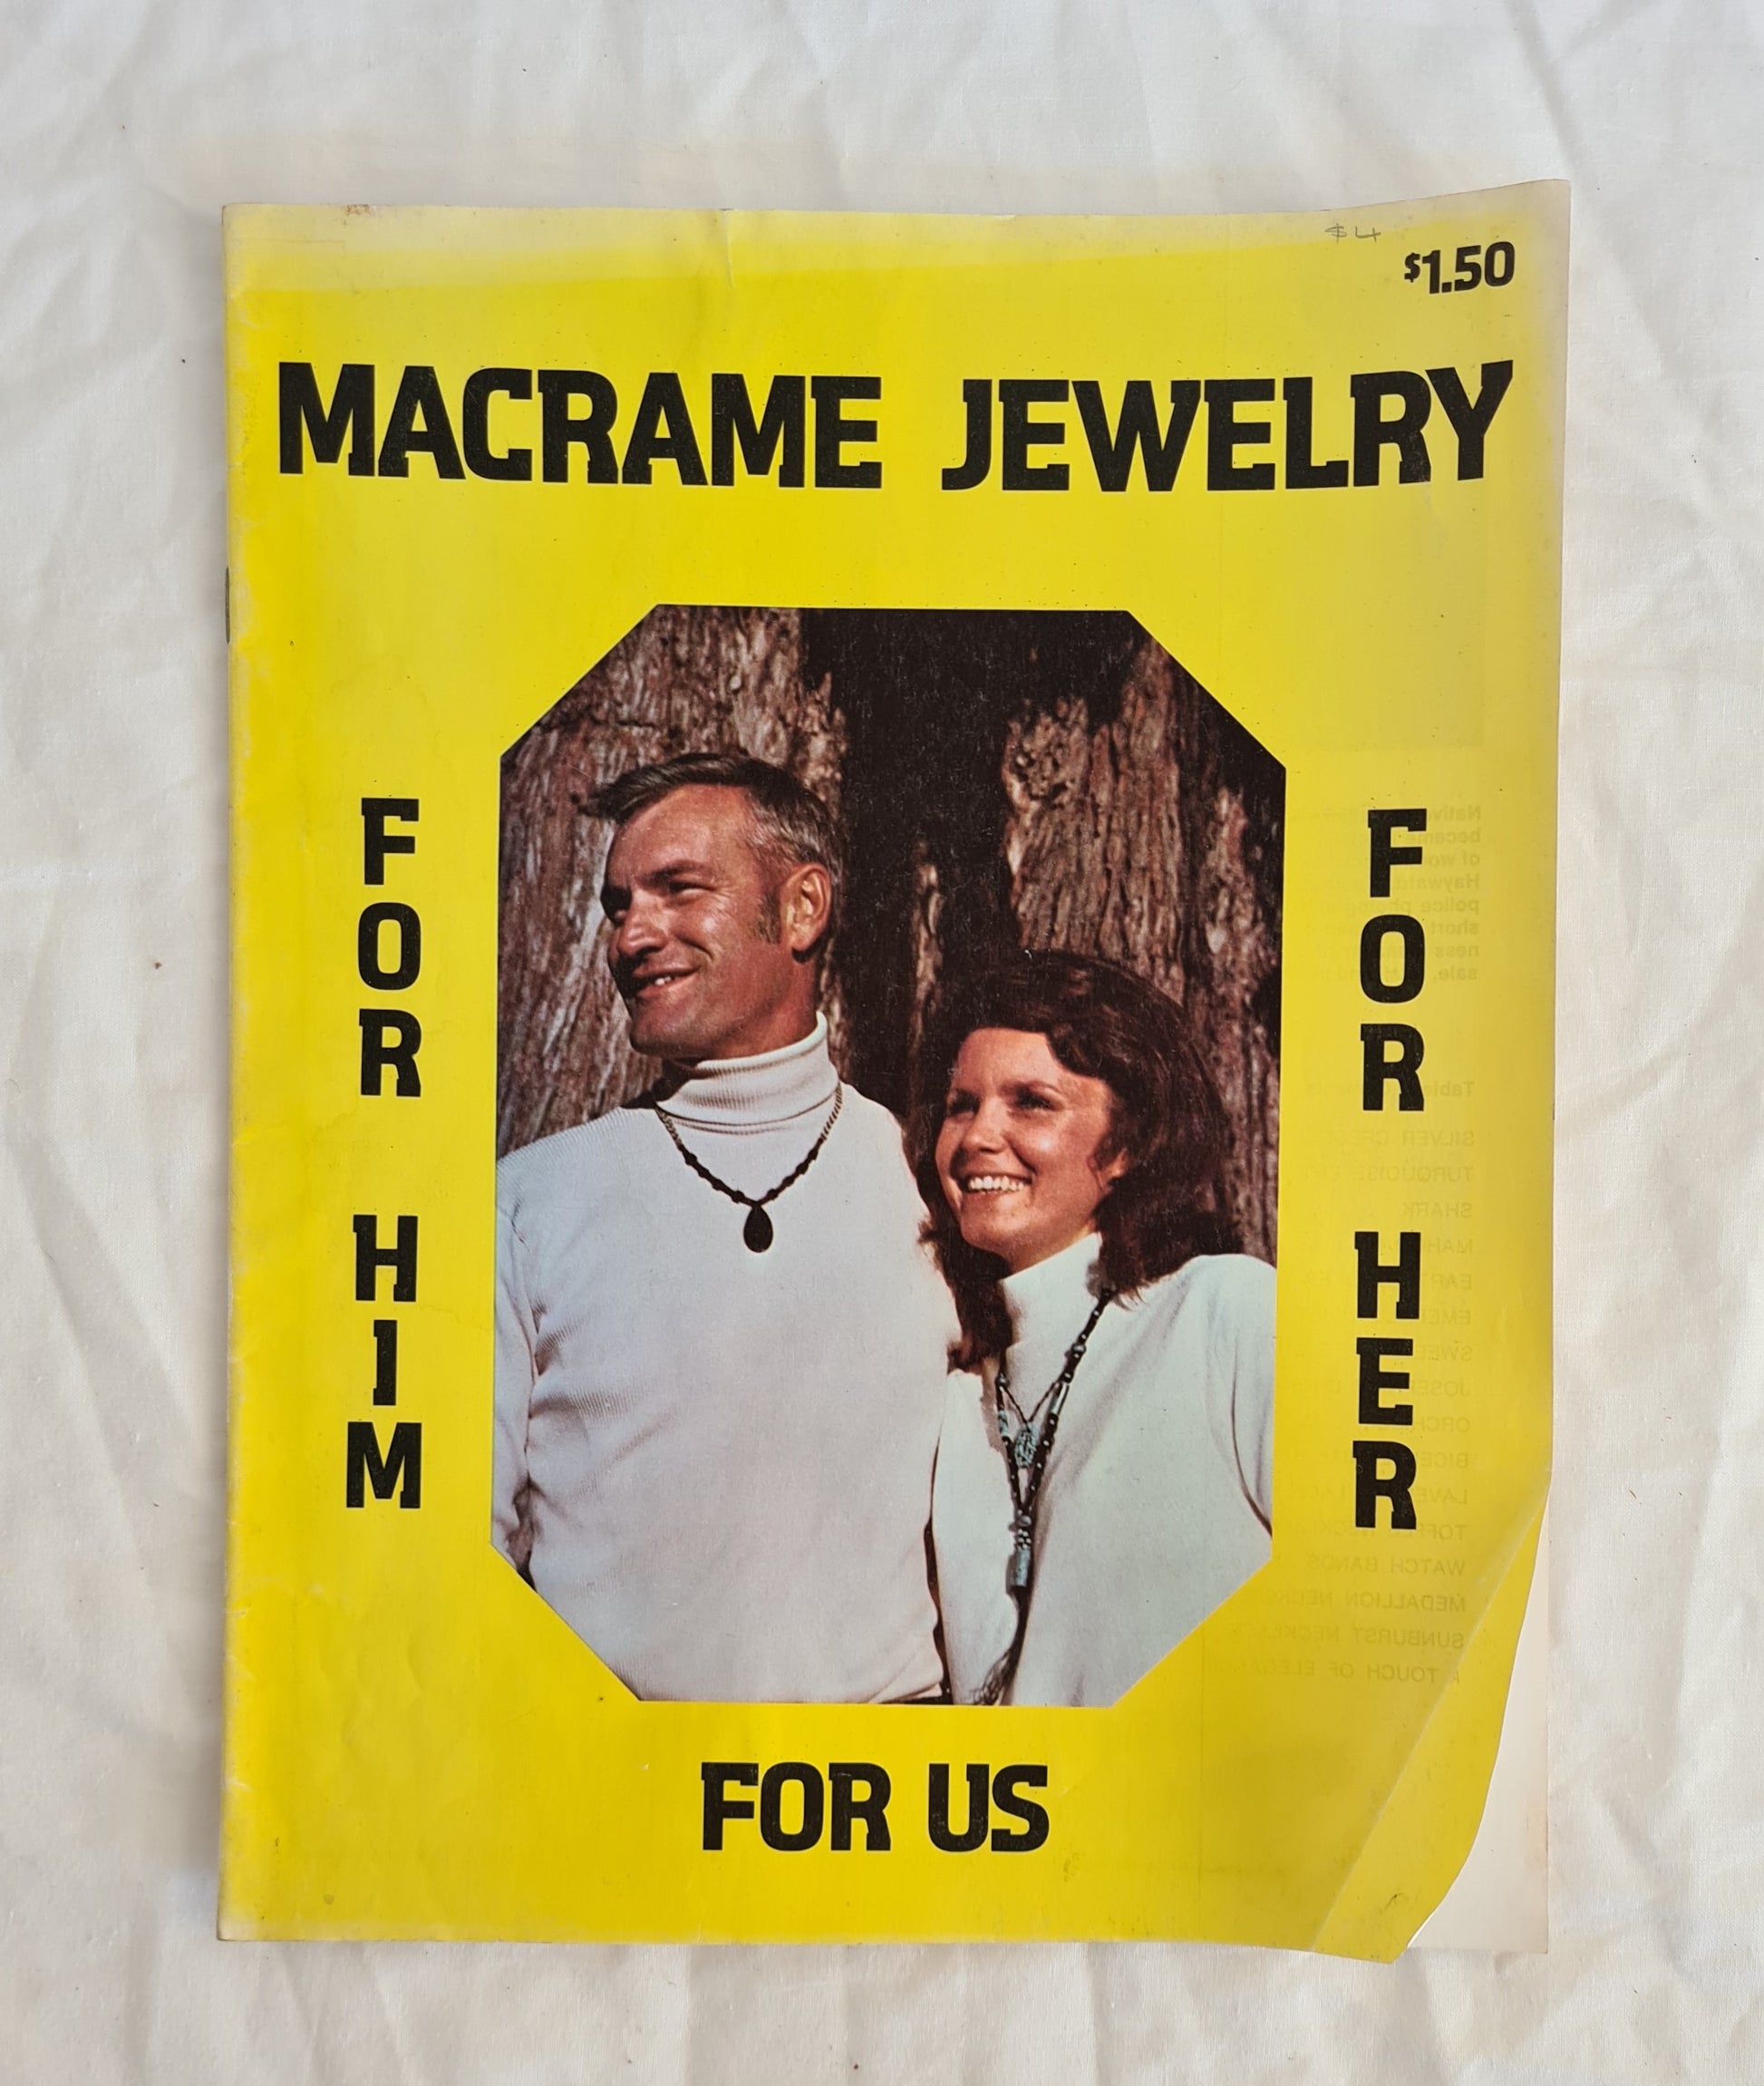 Macrame Jewelry  For Him For Her For Us  by “Marv” Nelson and Alana “Jeep” Ziemer